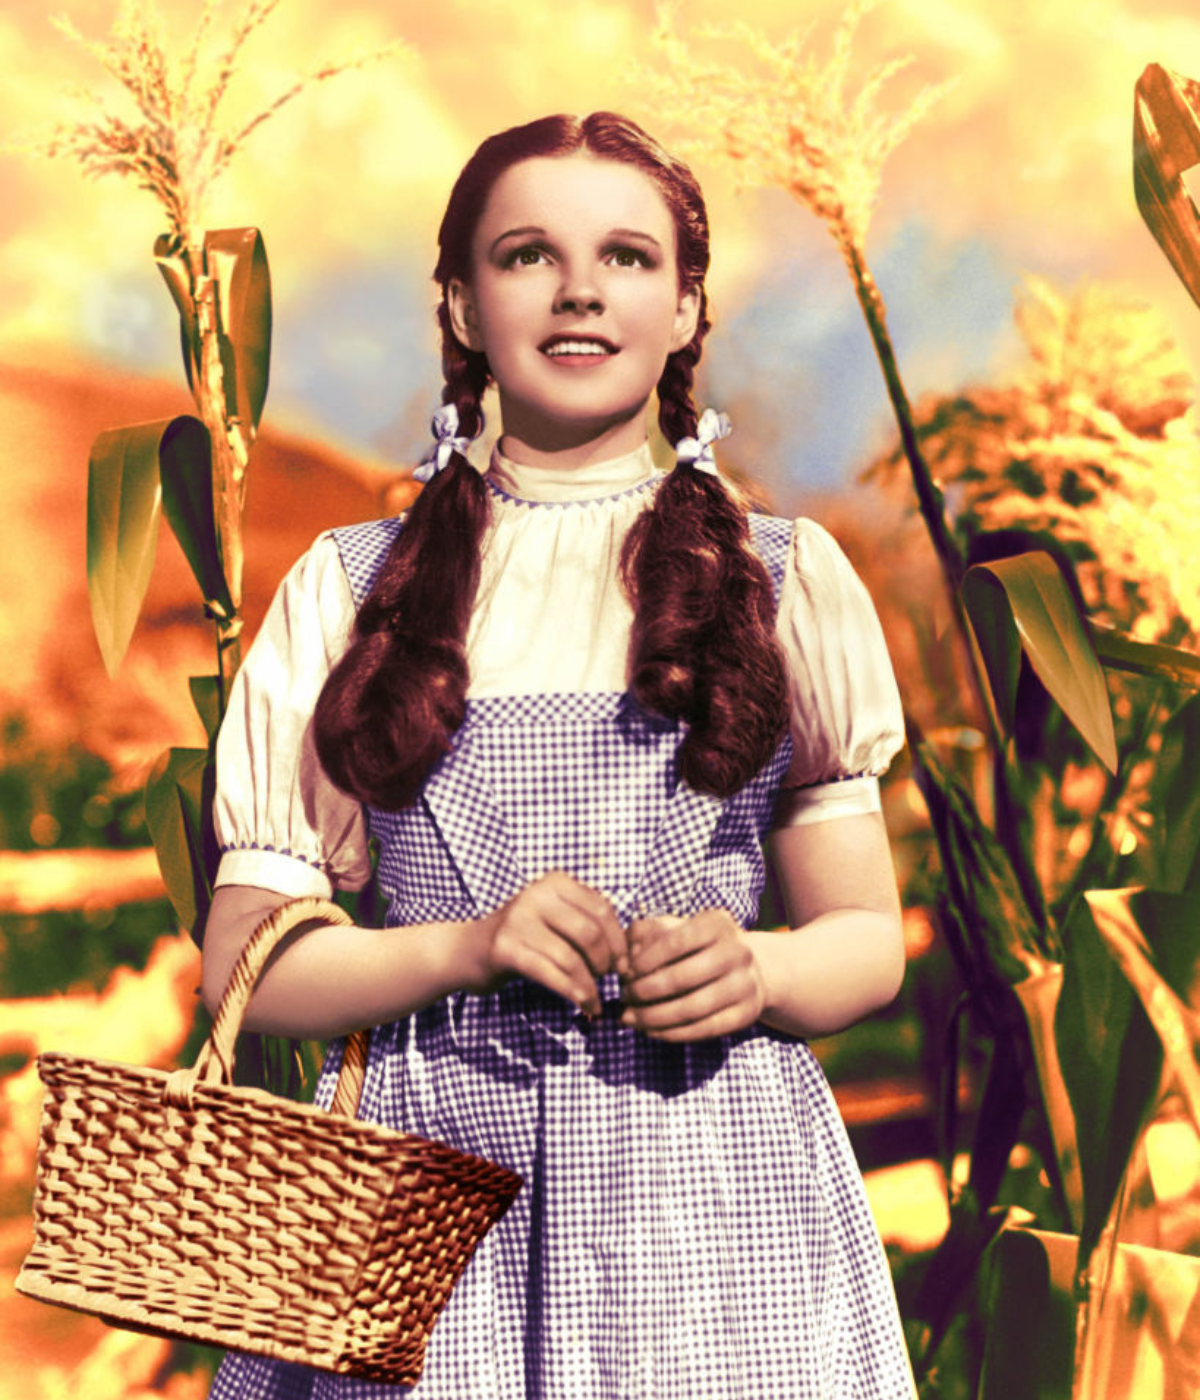 Judy Garland in "The Wizard of Oz" 